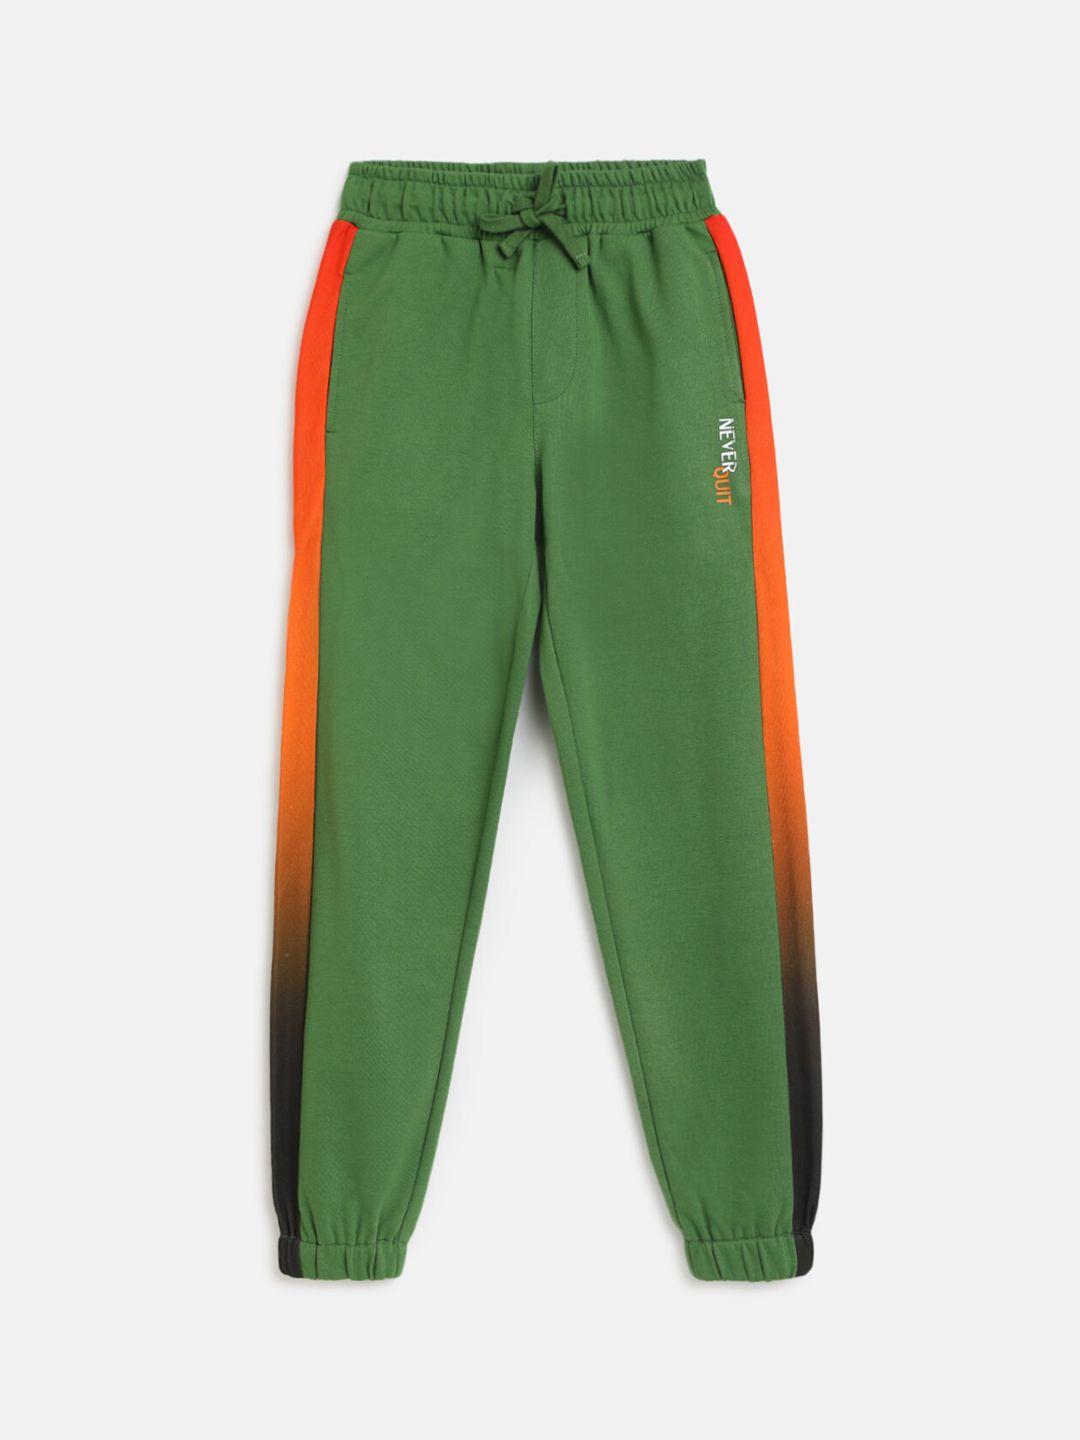 lil-tomatoes-boys-green-&-orange-solid-pure-cotton-joggers